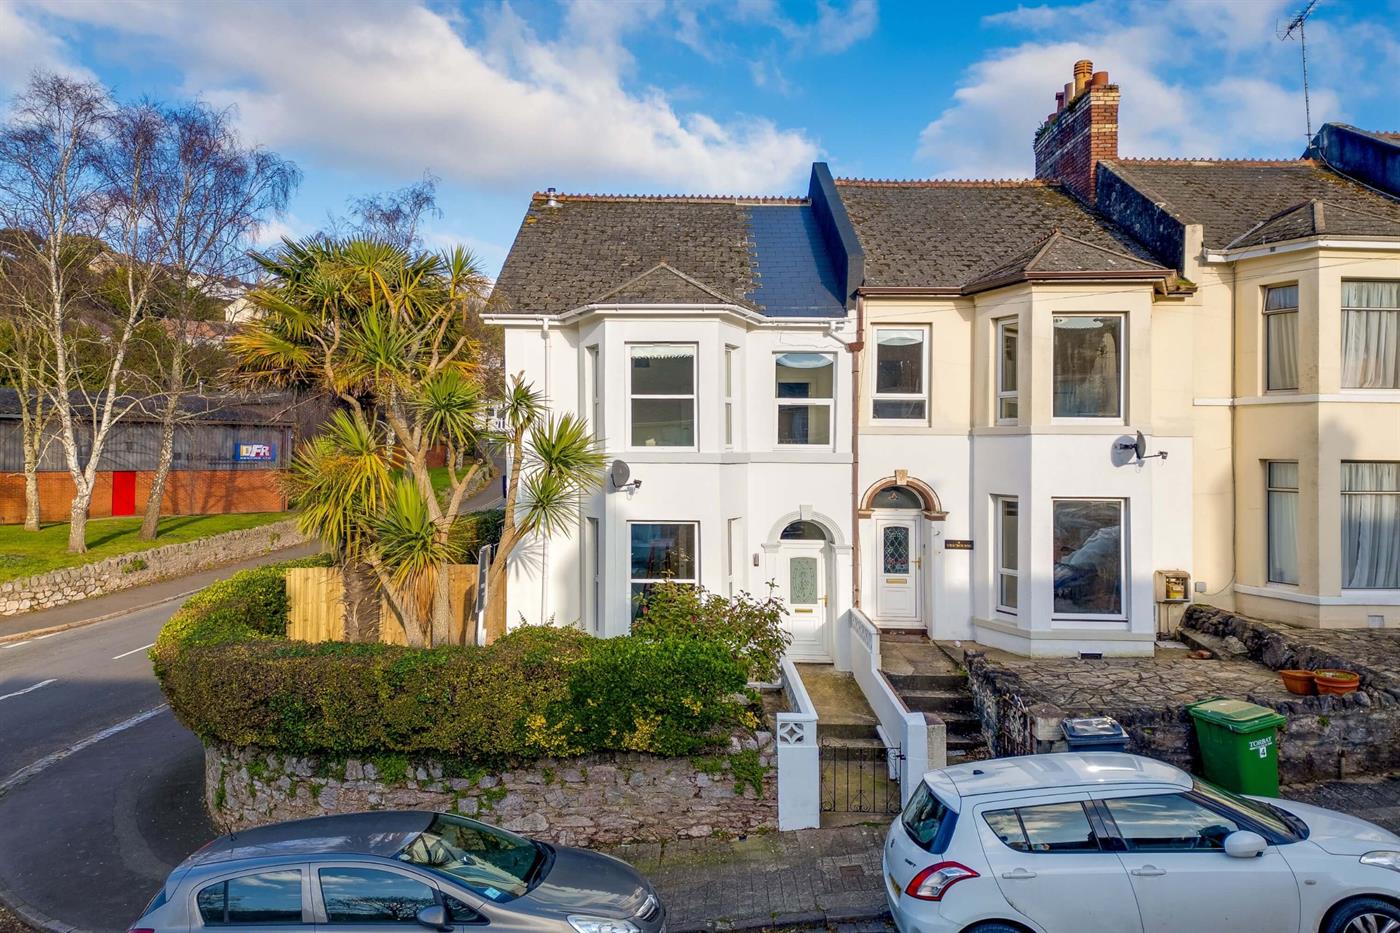 3 Bedroom End of Terrace House for Sale: Westbourne Road, Torquay, TQ1 4JU